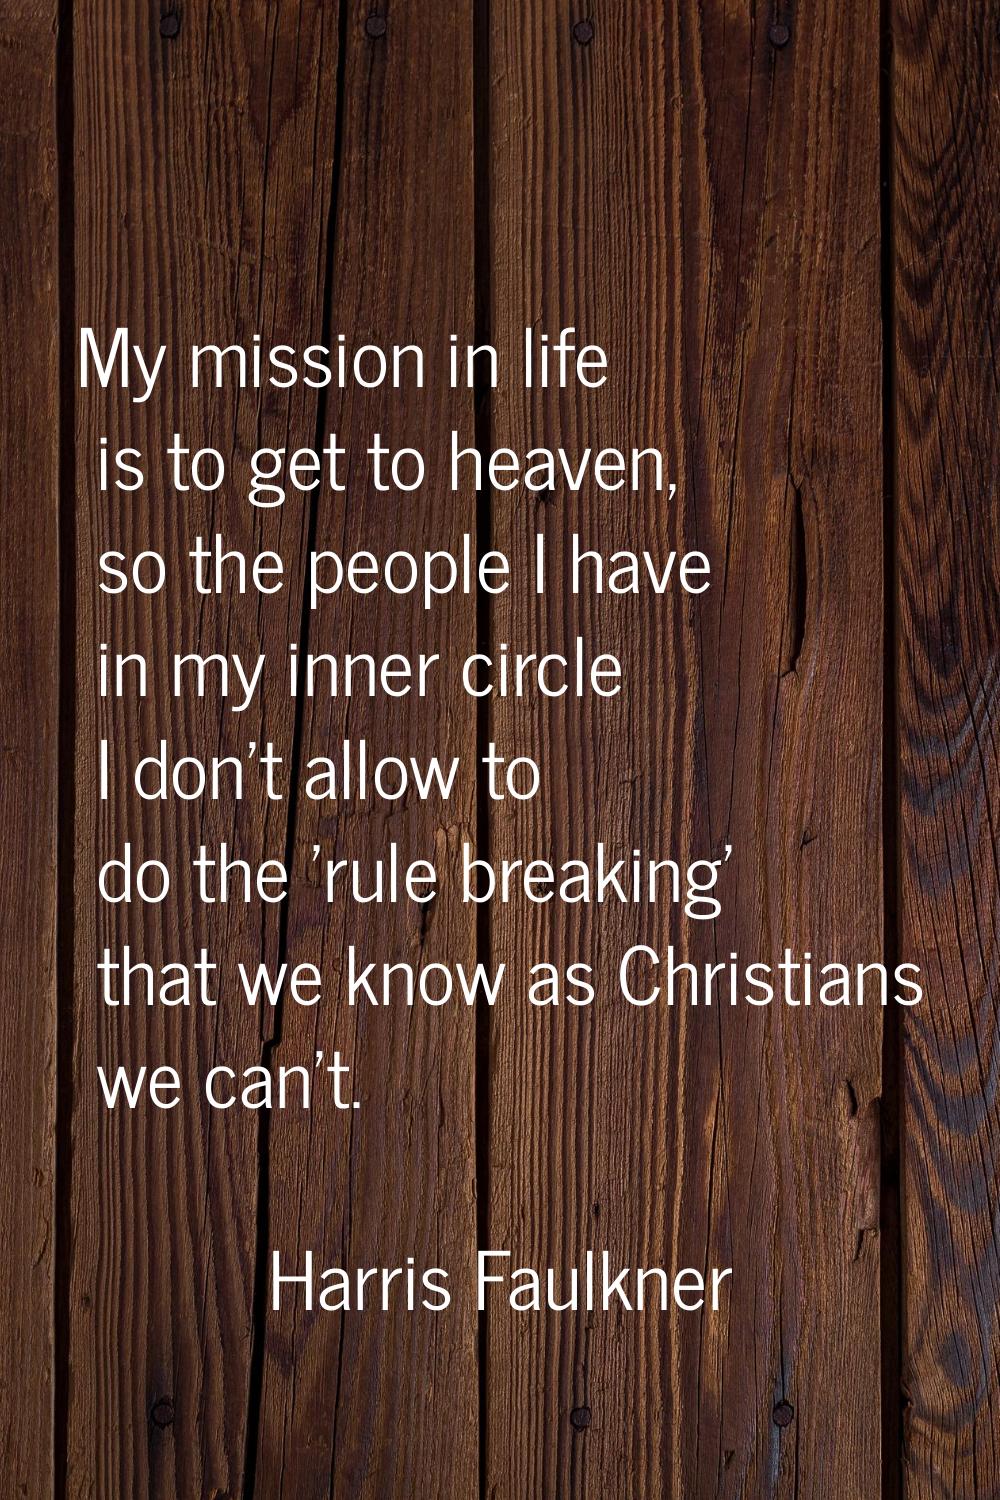 My mission in life is to get to heaven, so the people I have in my inner circle I don't allow to do